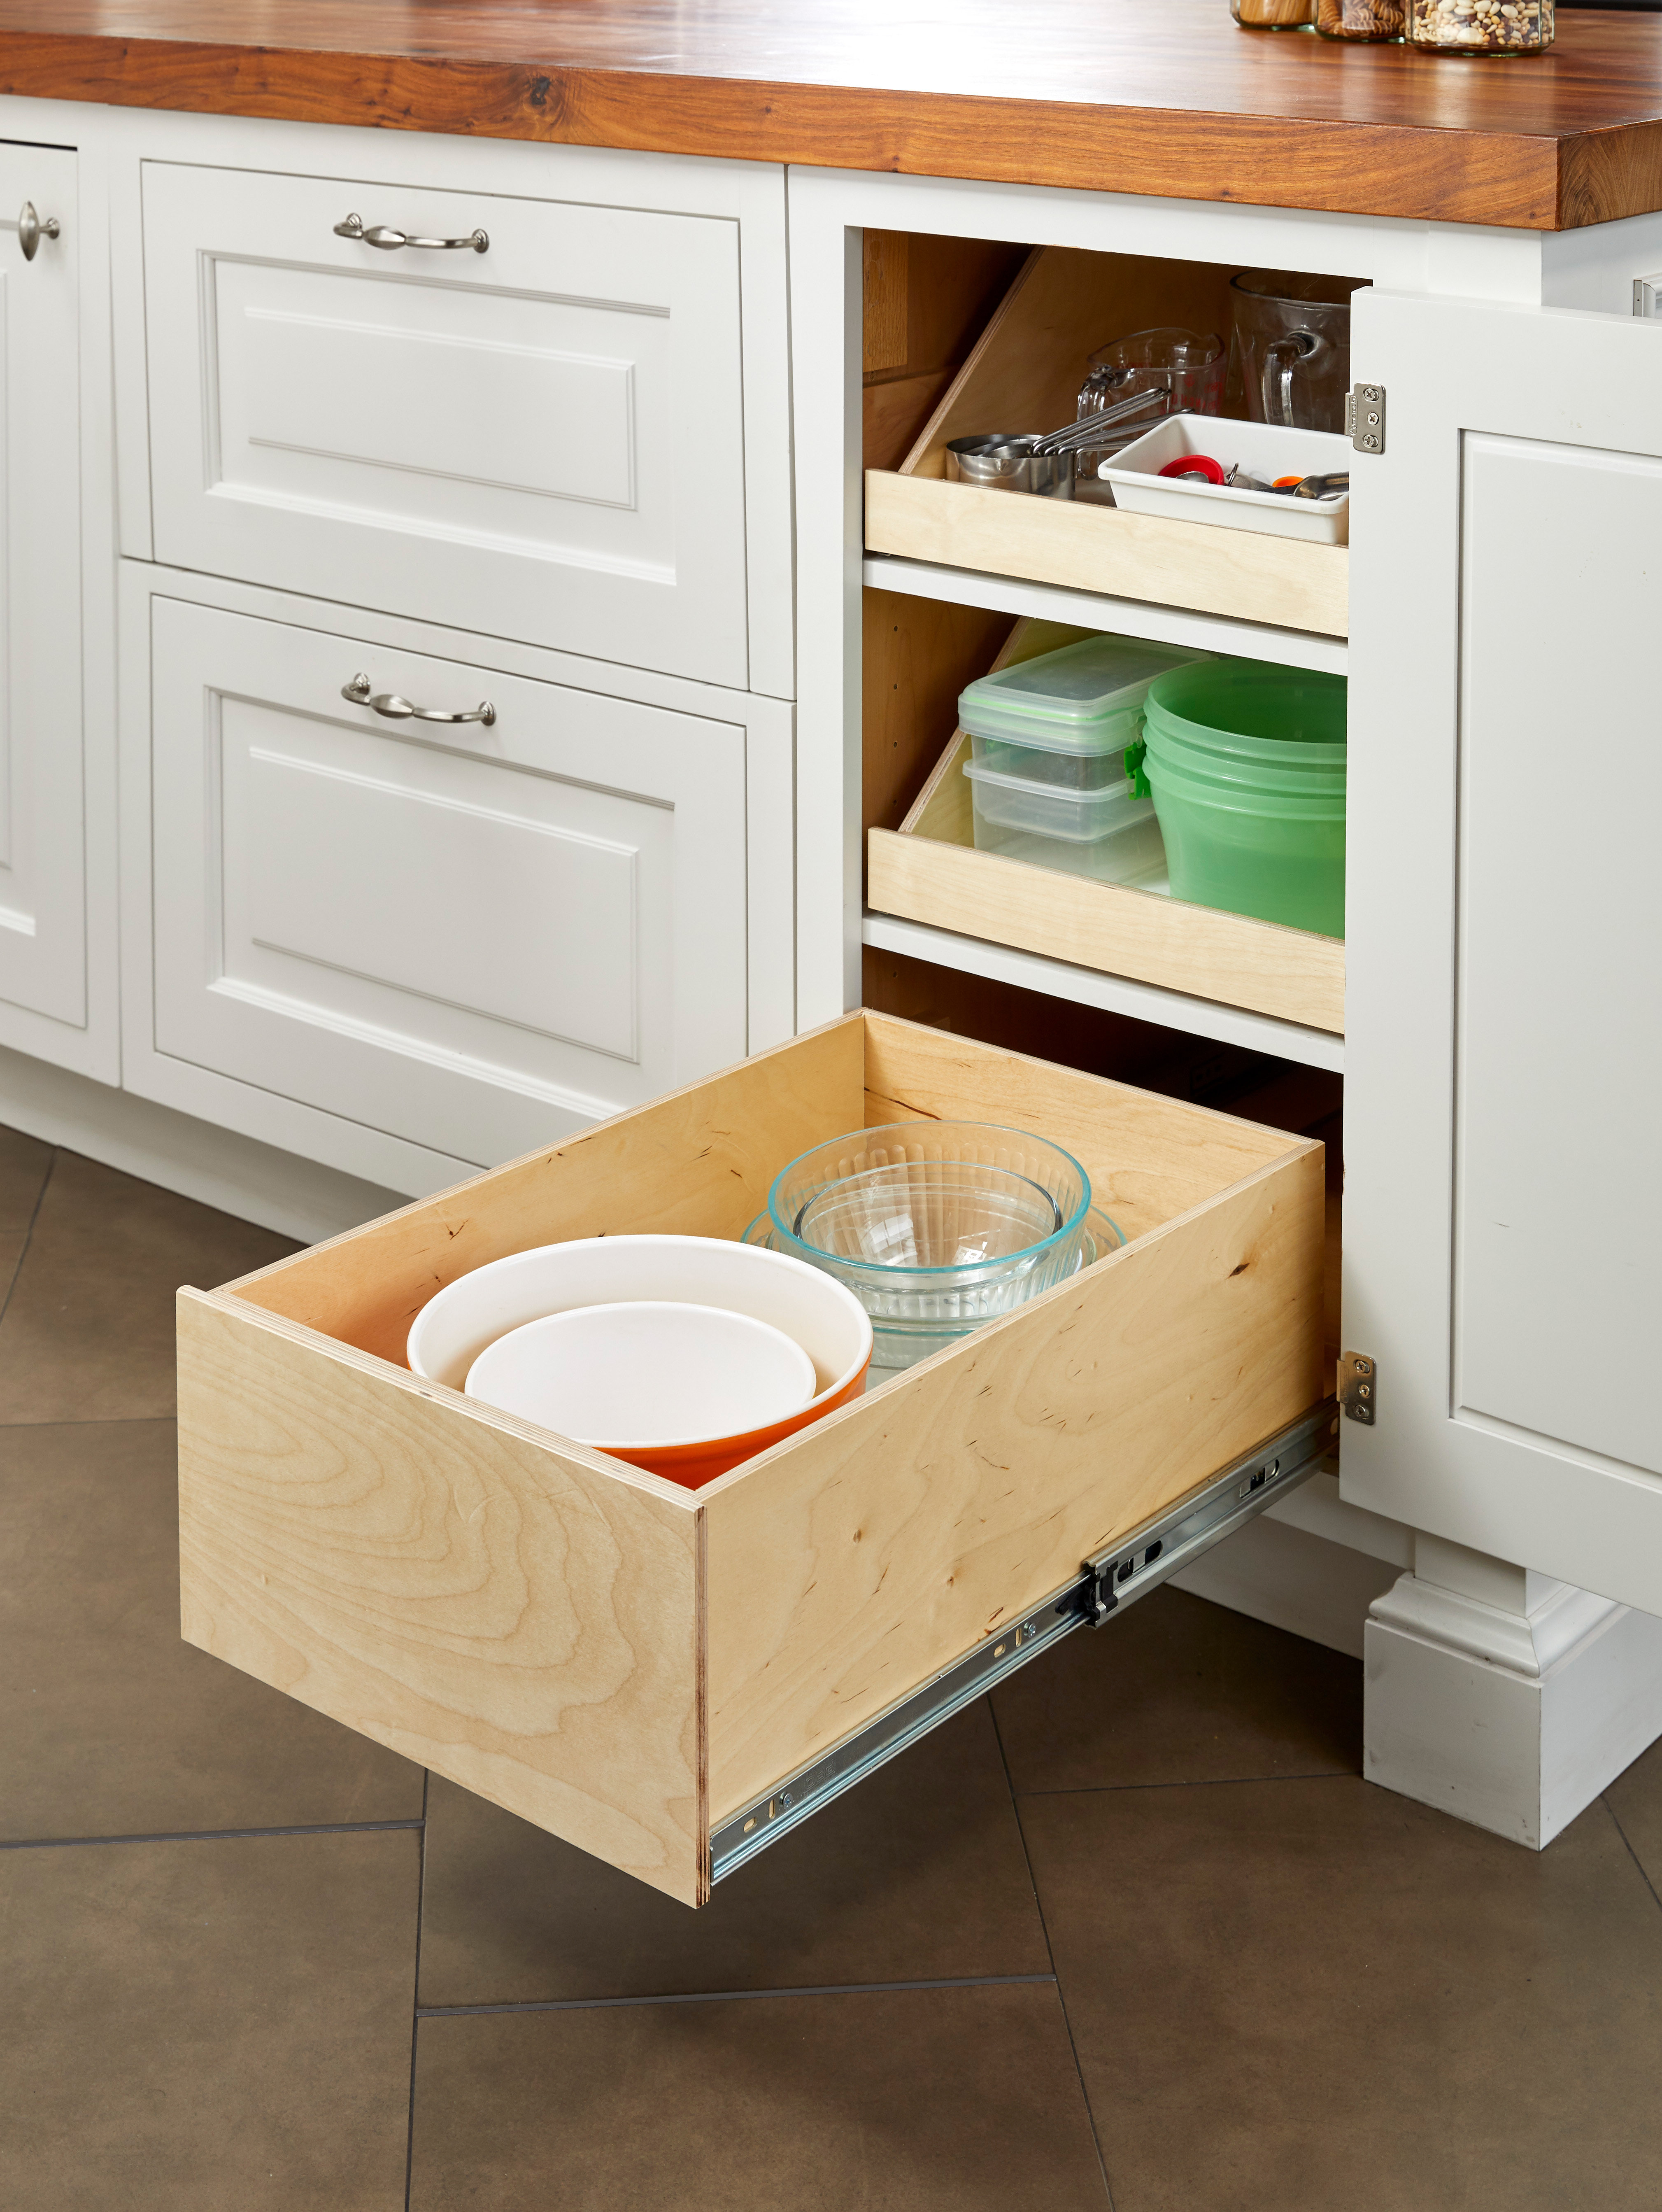 ROOMTEC Pull Out Cabinet Organizer, Kitchen Cabinet Organizer and Storage 2-Tier Cabinet Pull Out Shelves for Kitchen,Under Sink Organizers and